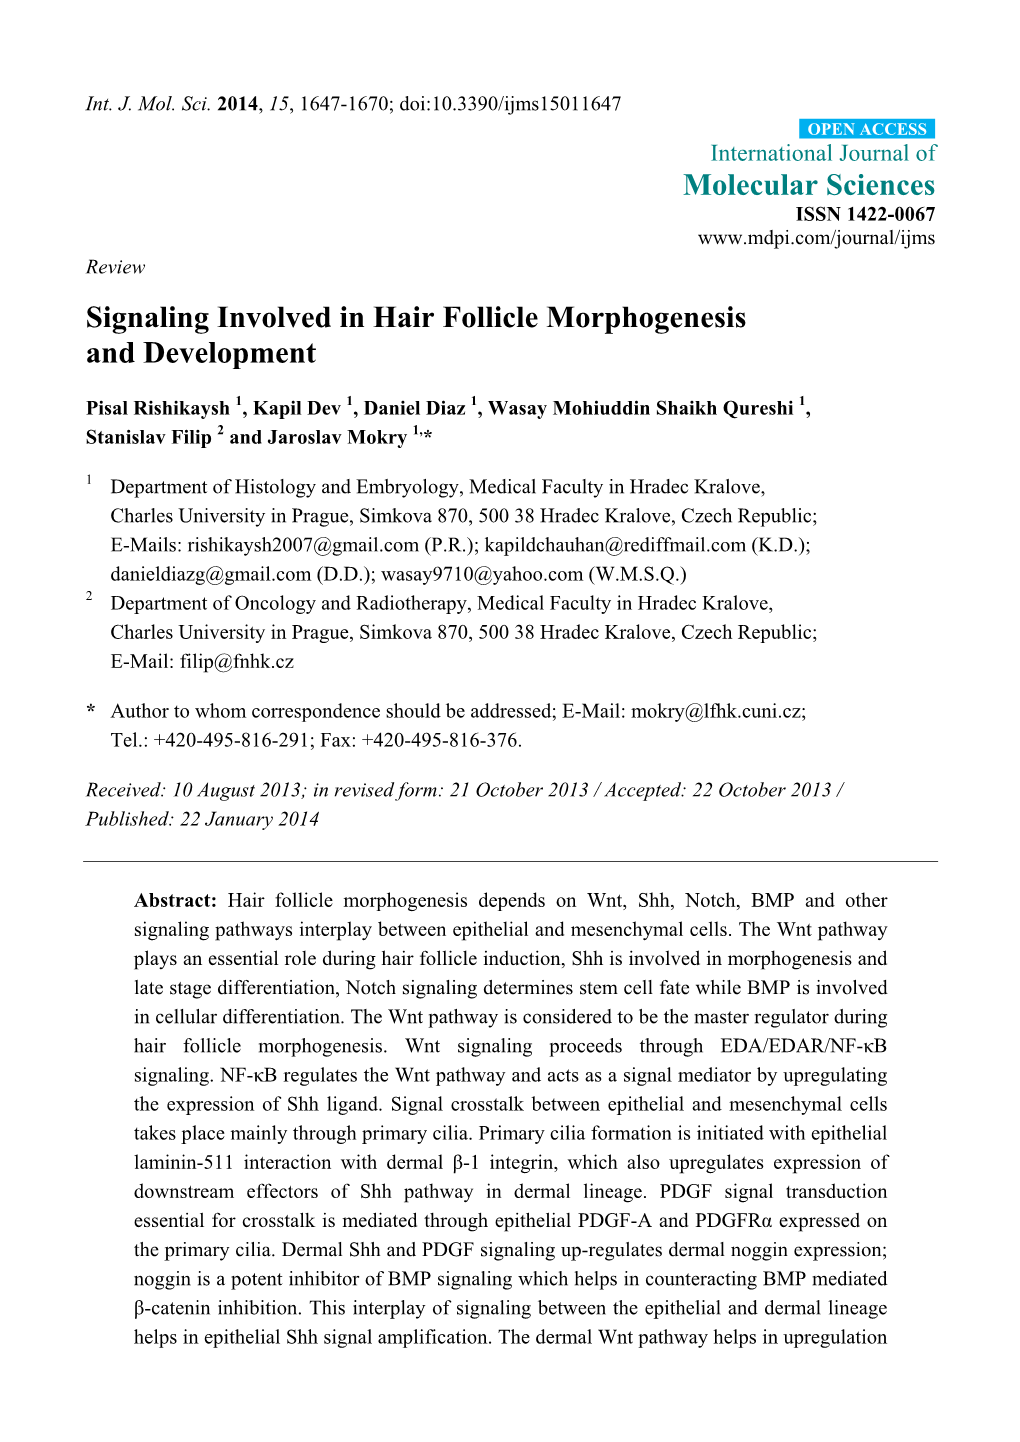 Signaling Involved in Hair Follicle Morphogenesis and Development